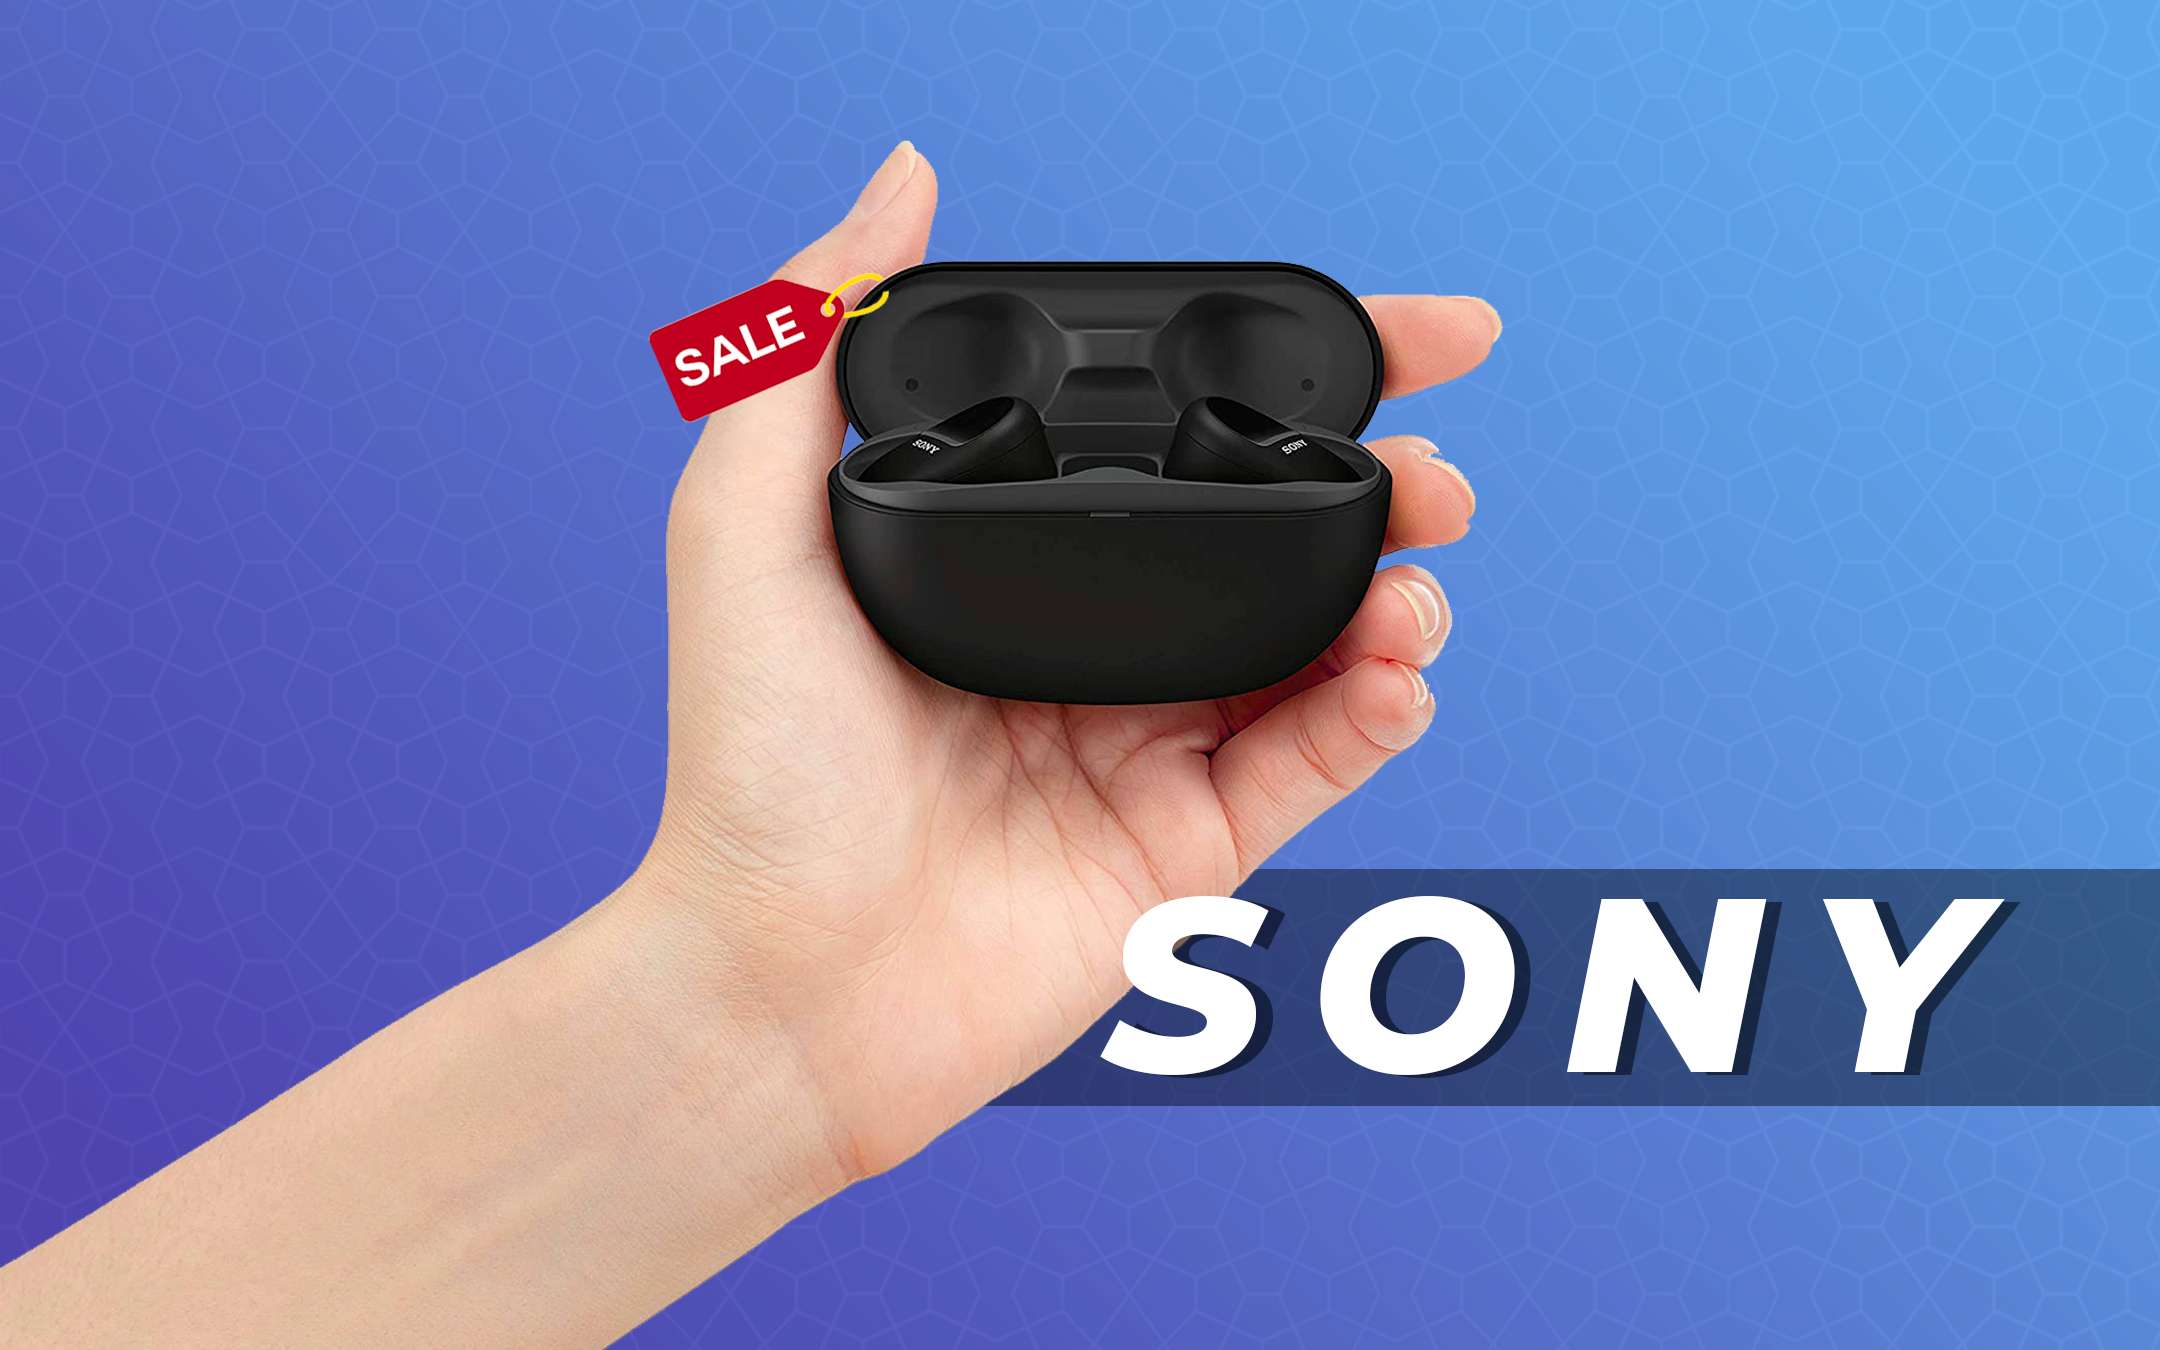 Sony: cuffie TWS con Noise Cancelling in super offerta (-70€)